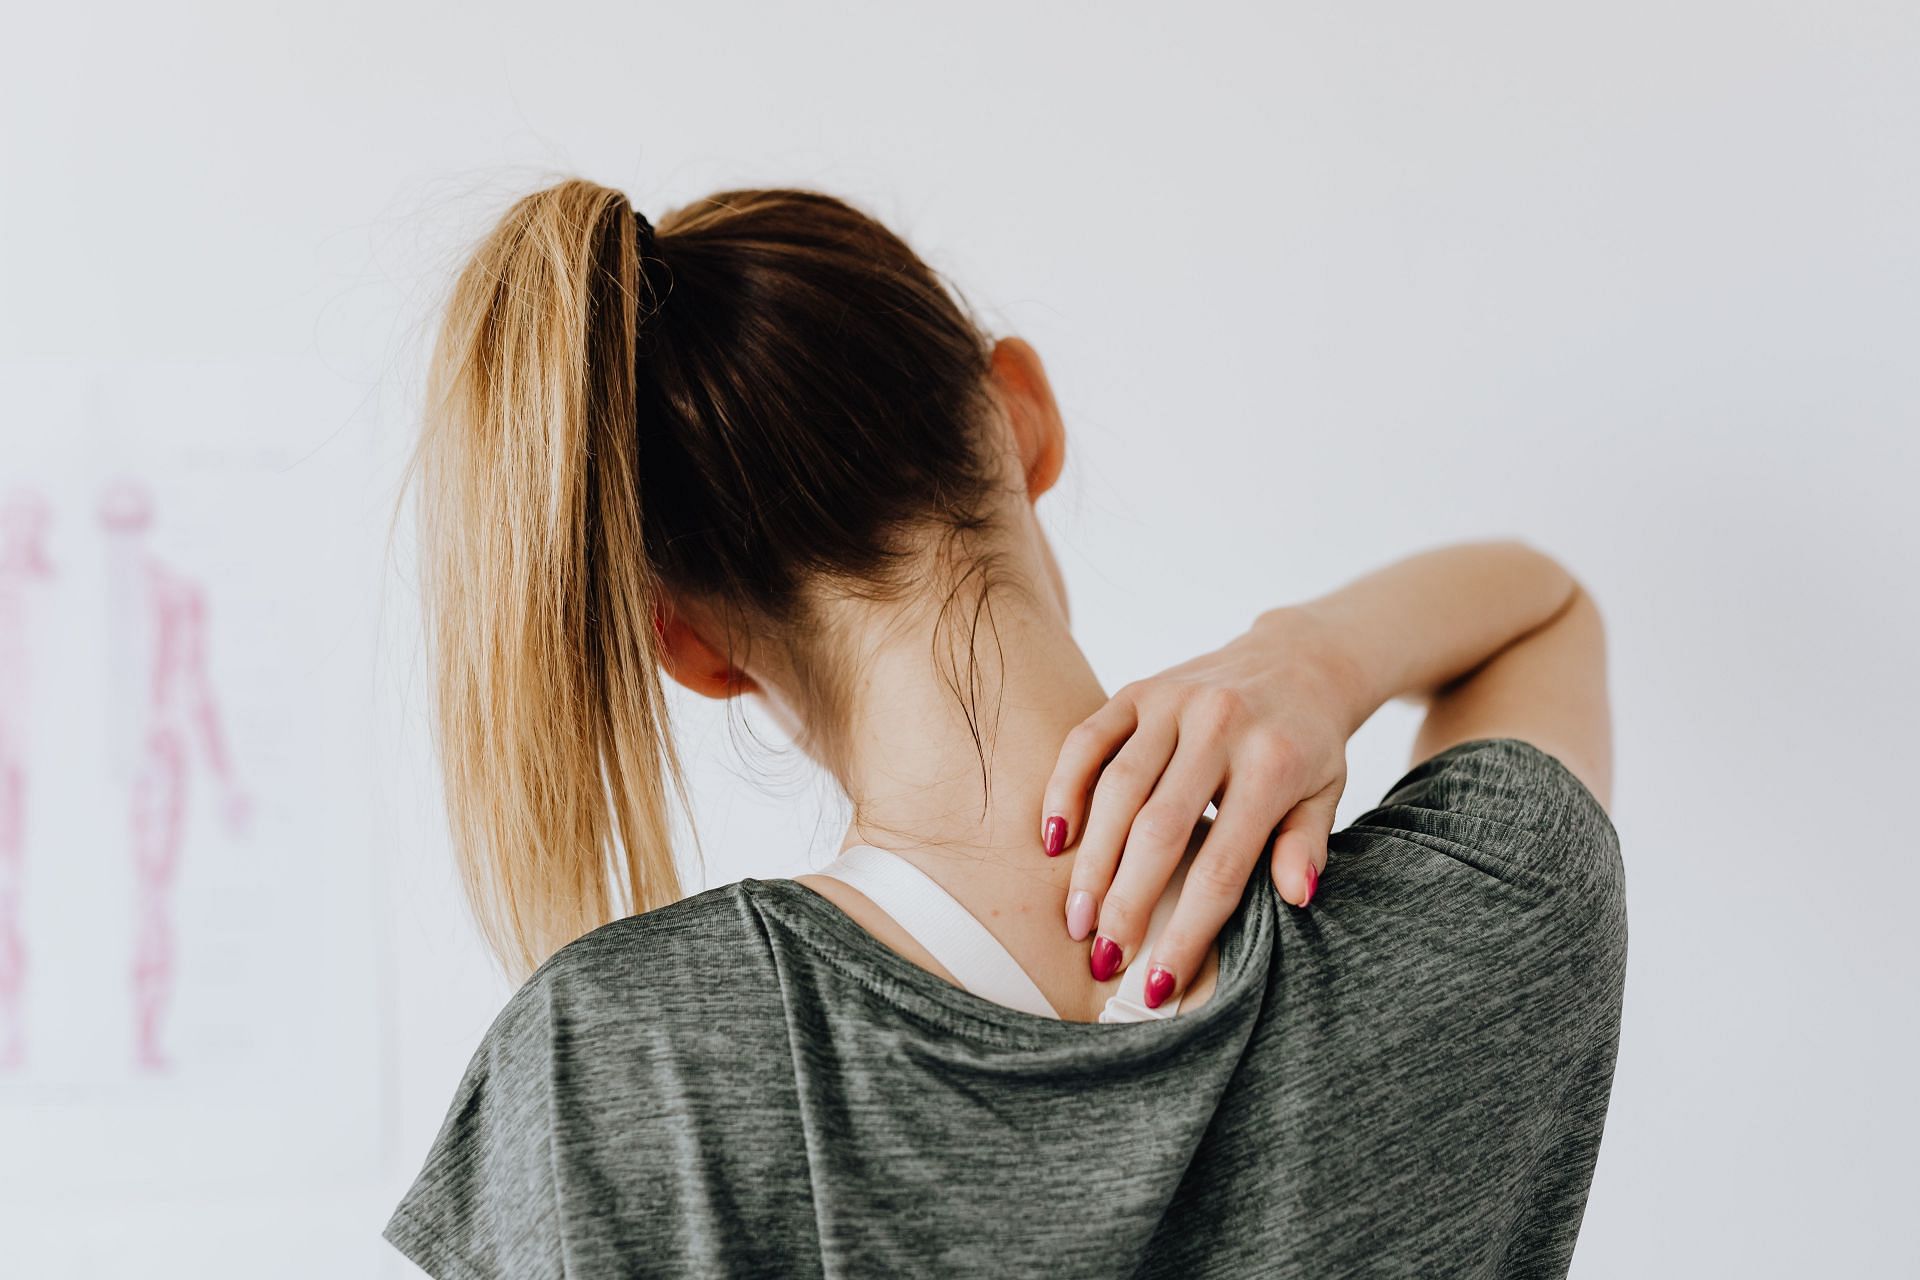 5 Effective Exercises to Reduce Neck Pain